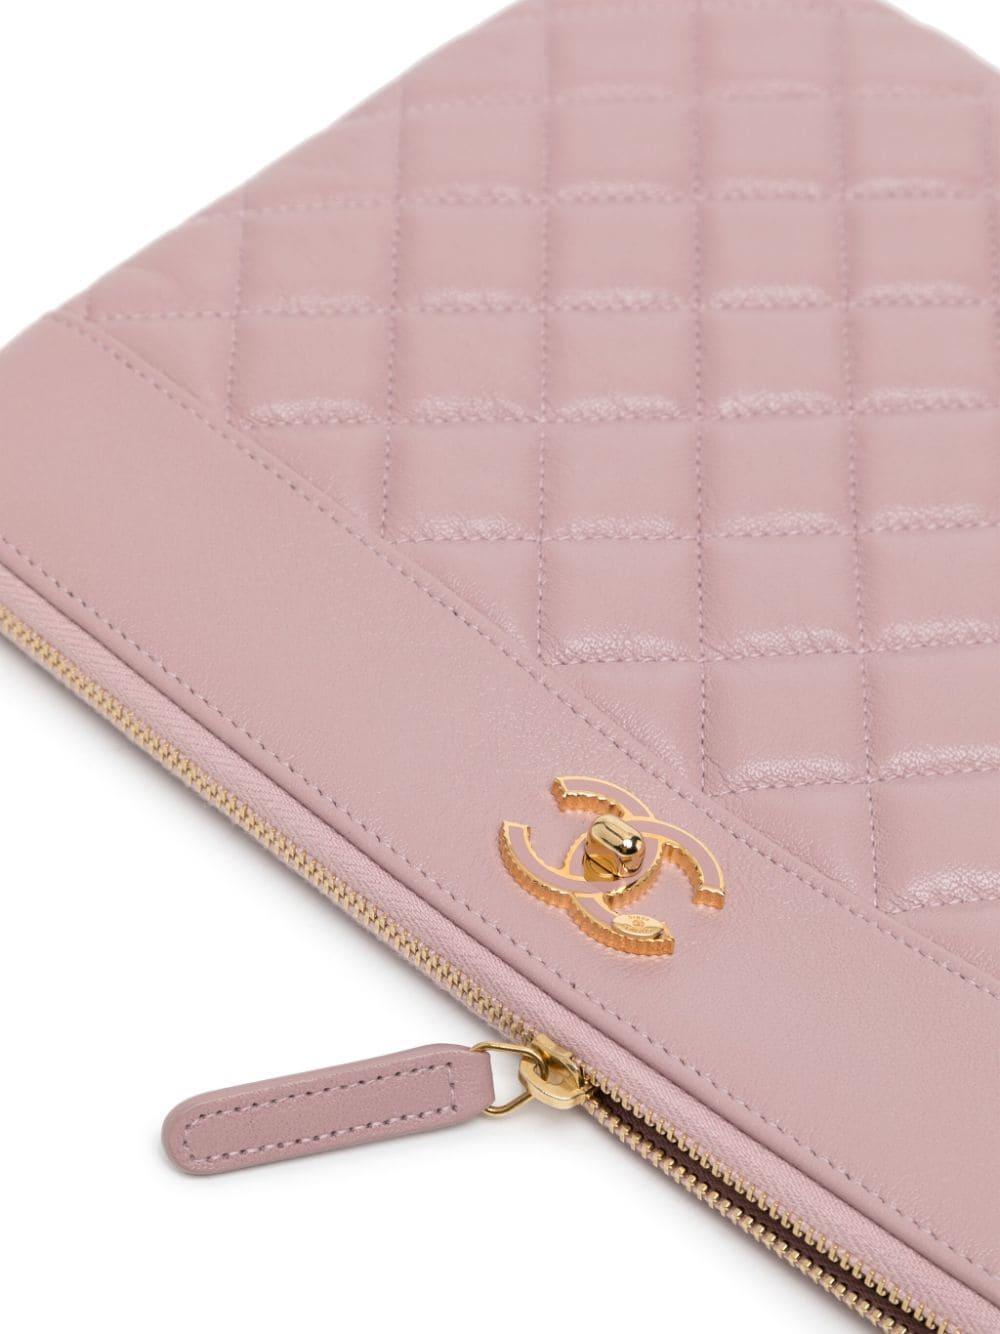 Chanel Pink Quilted Clutch In Excellent Condition For Sale In London, GB